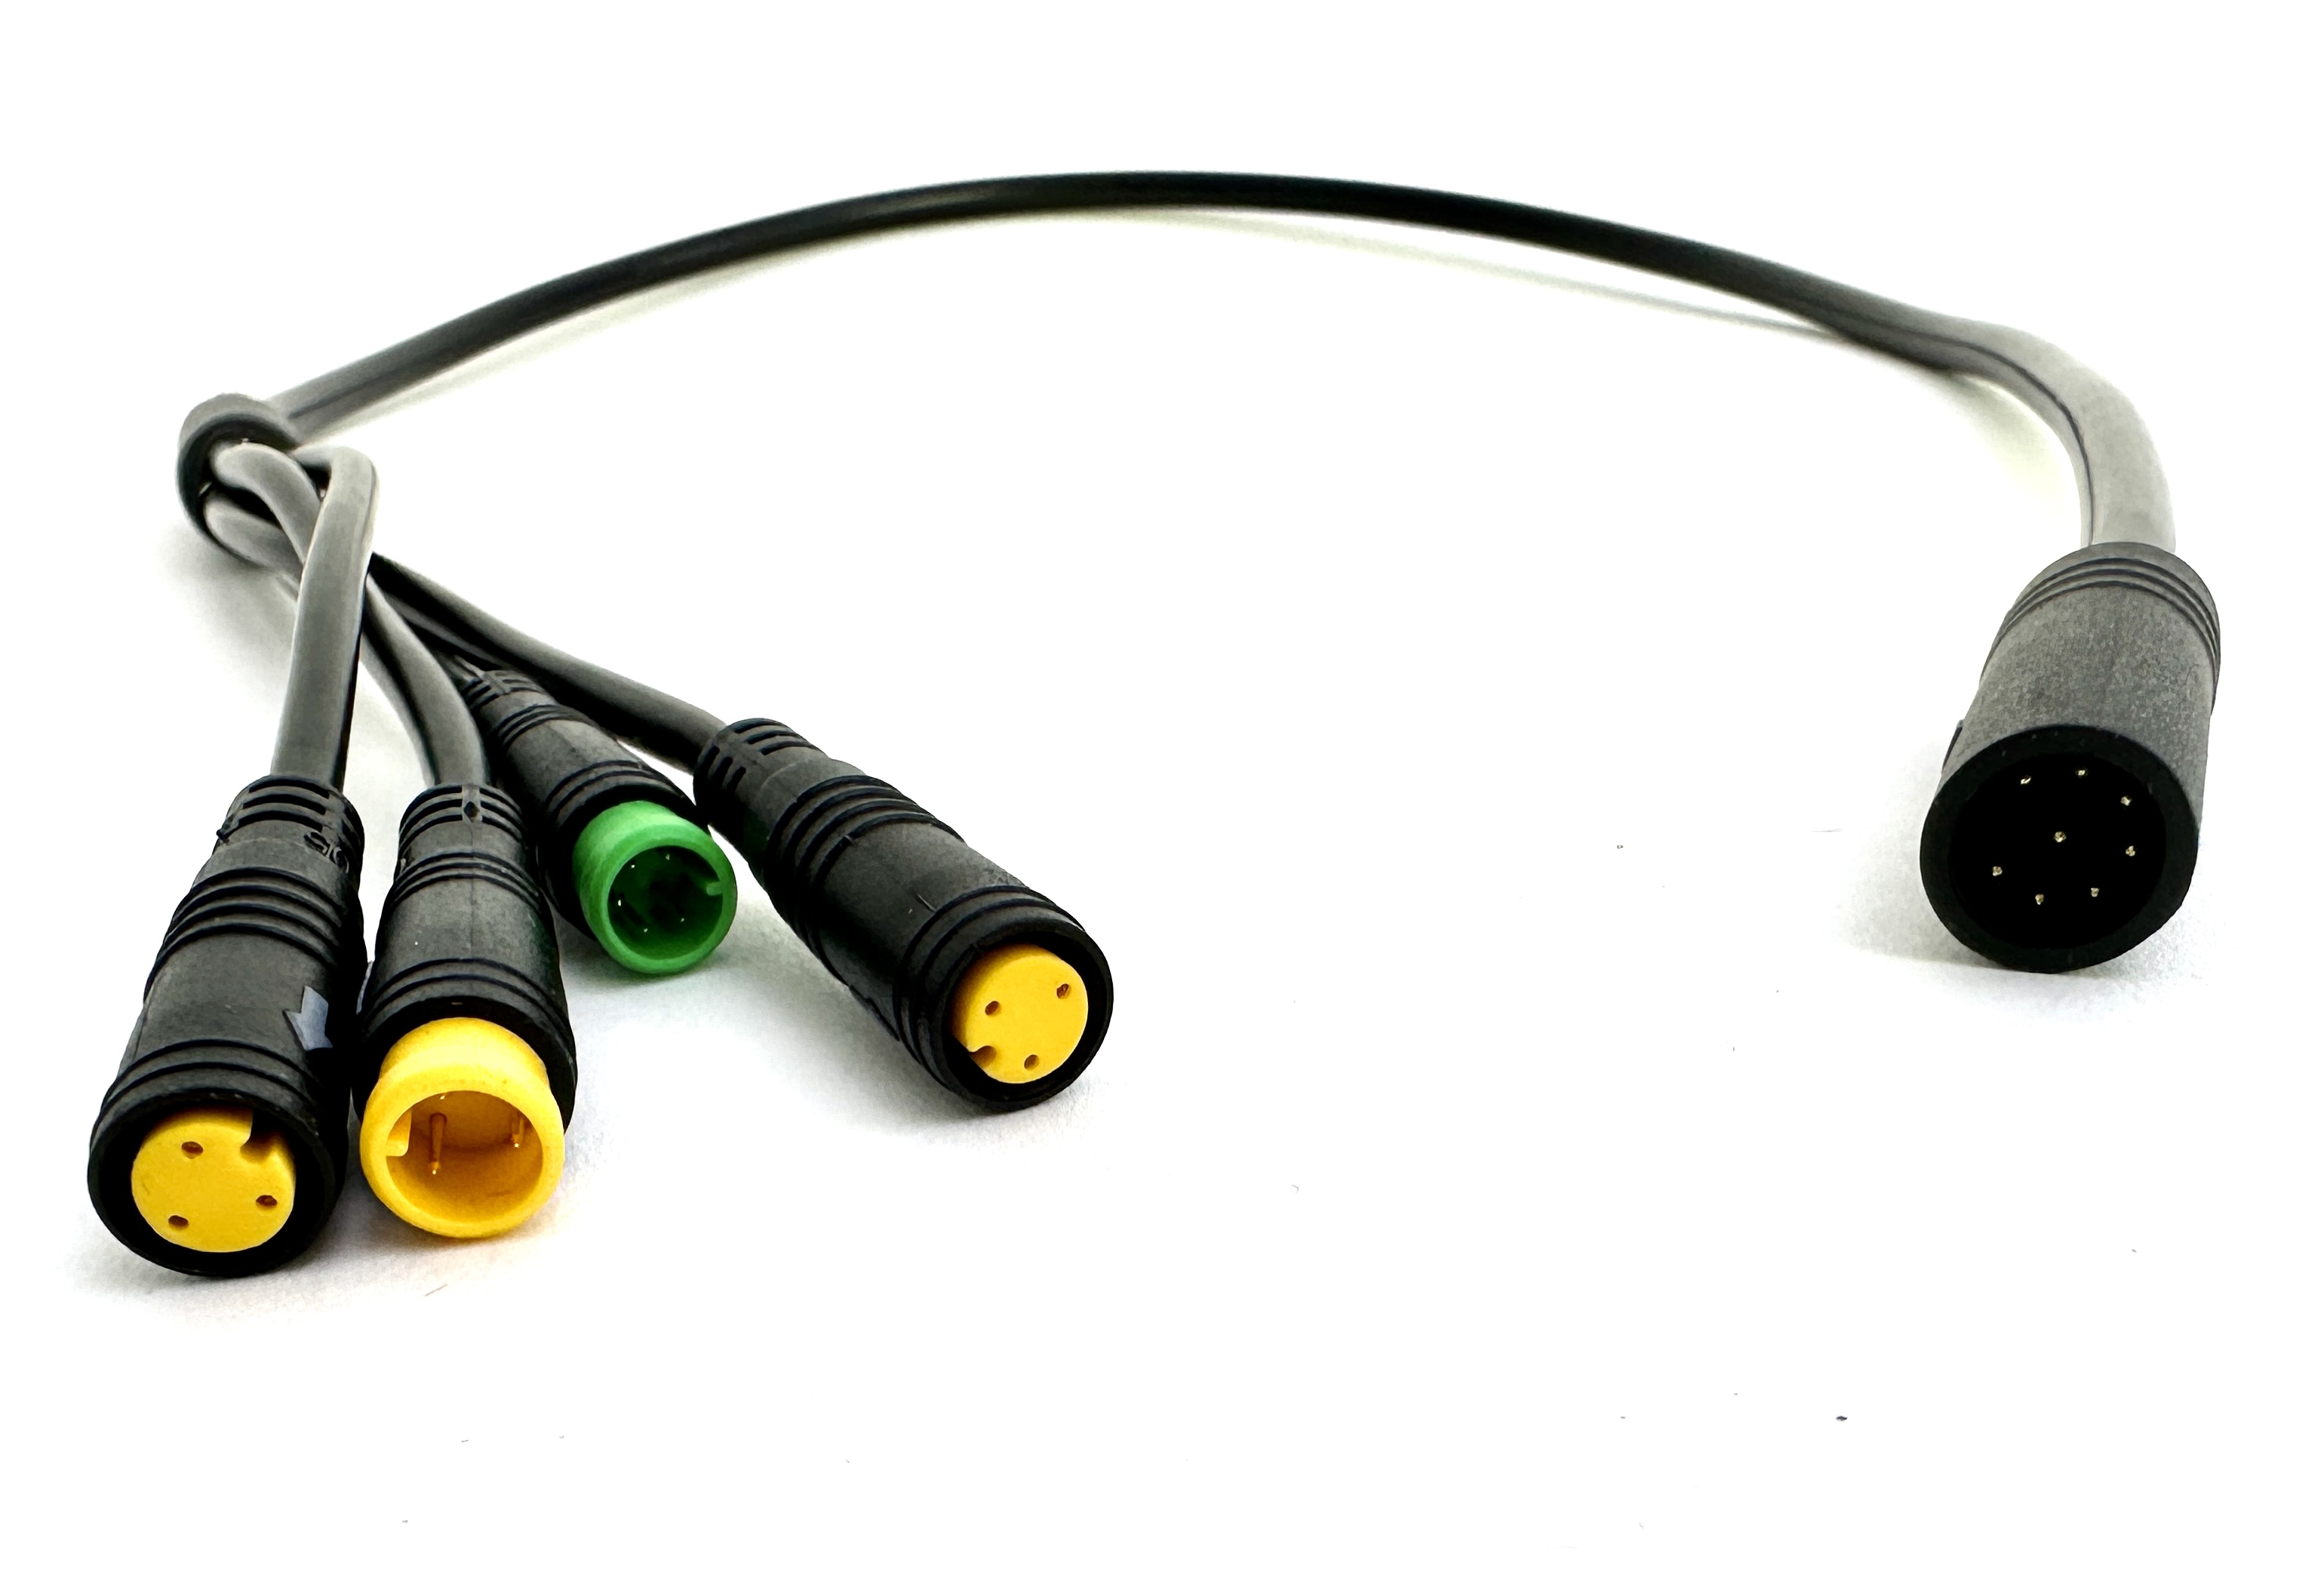 Bafang 1T4 wiring harness 70 cm / 27,55 inches with 2 PIN extension in cable protection hose